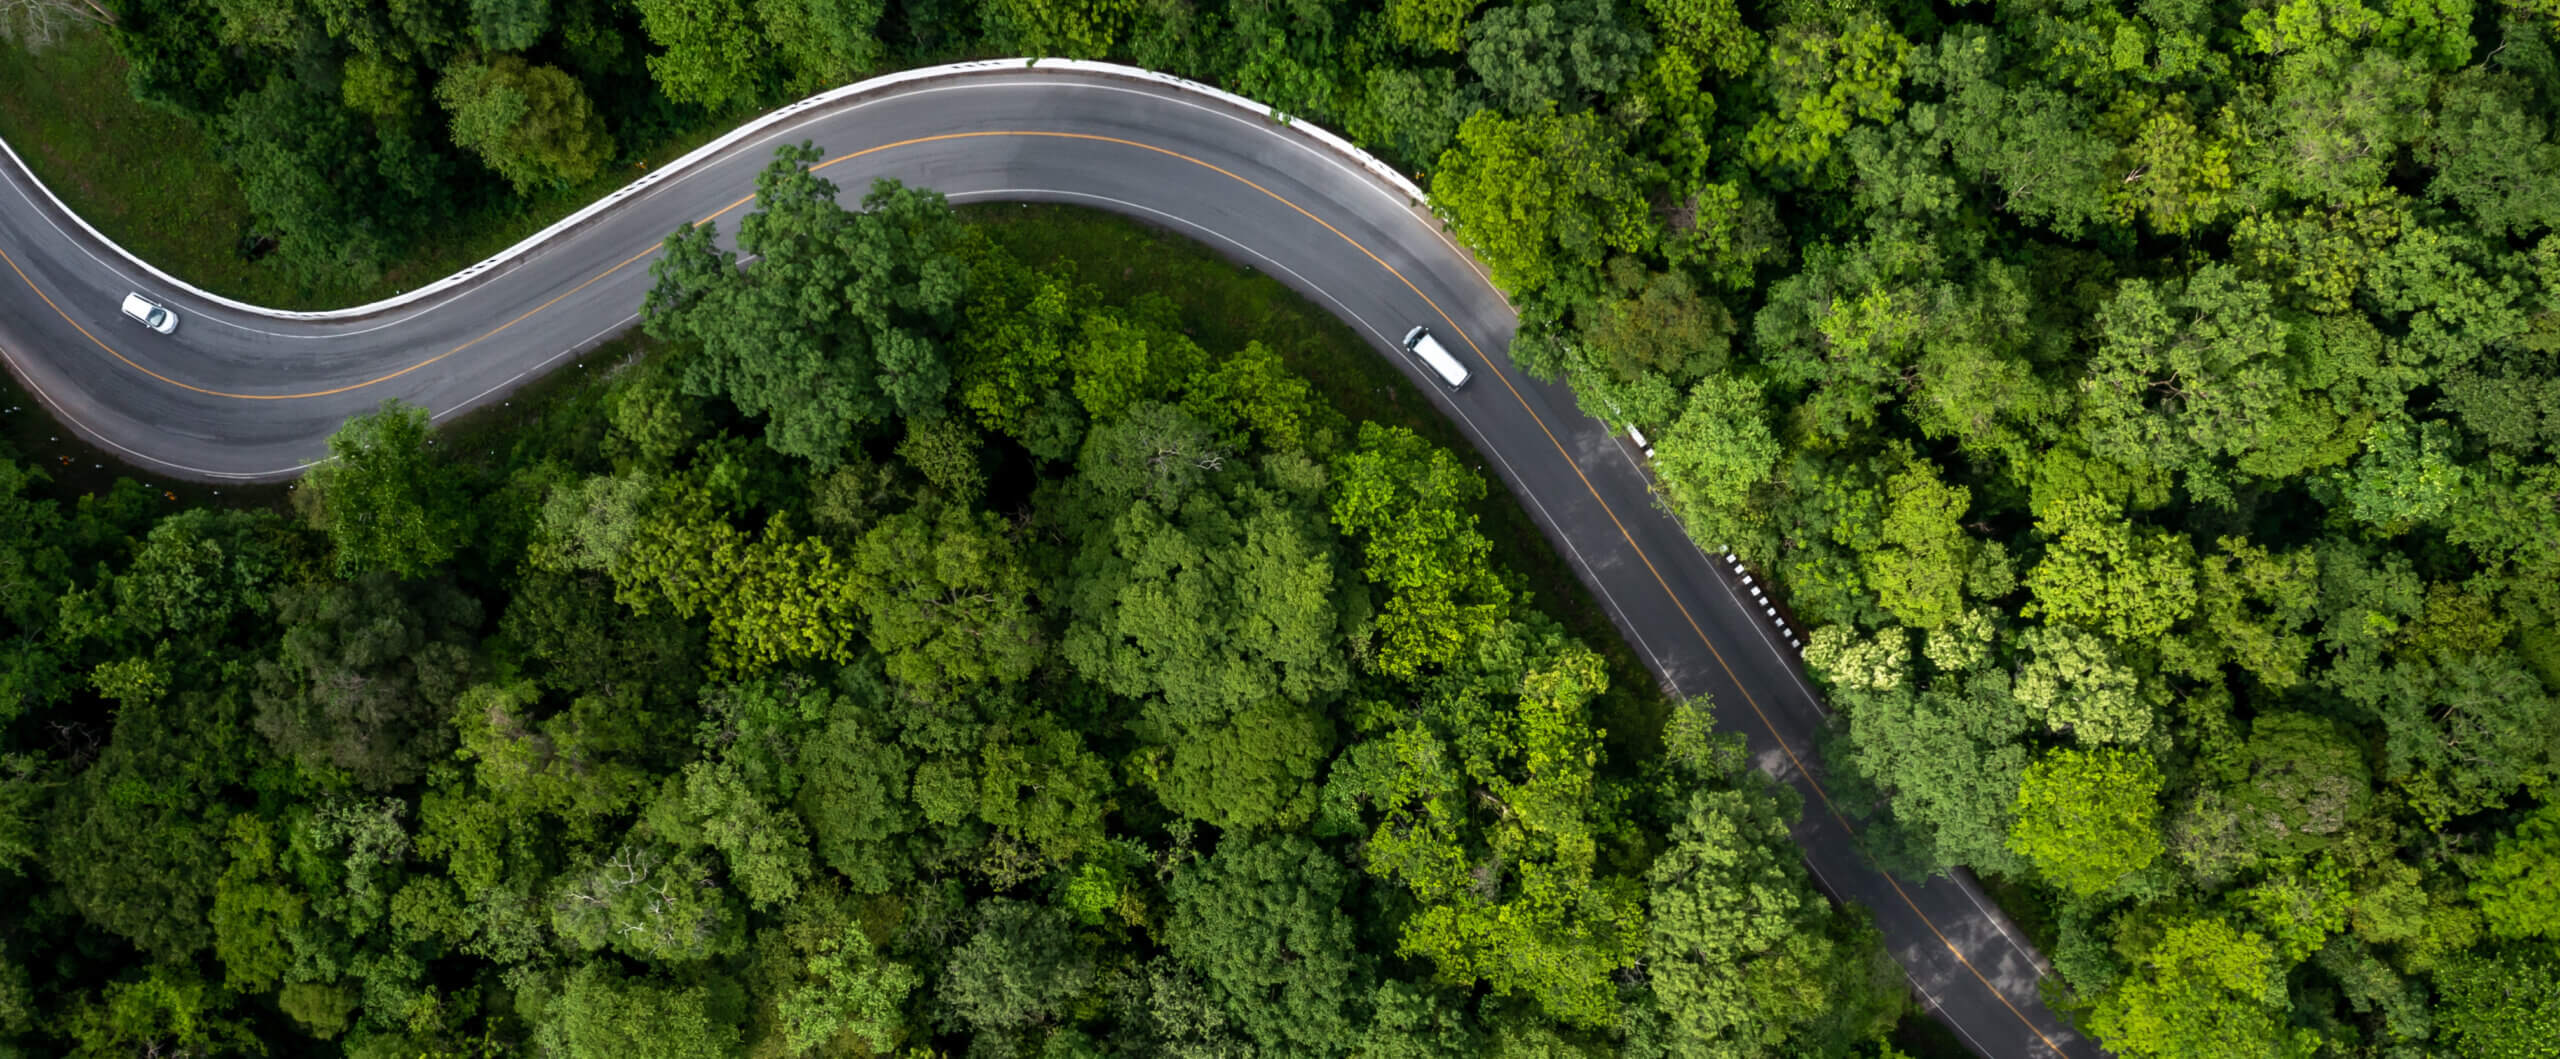 Bird's eye view of cars driving on a bendy road through a surrounding green forest of trees